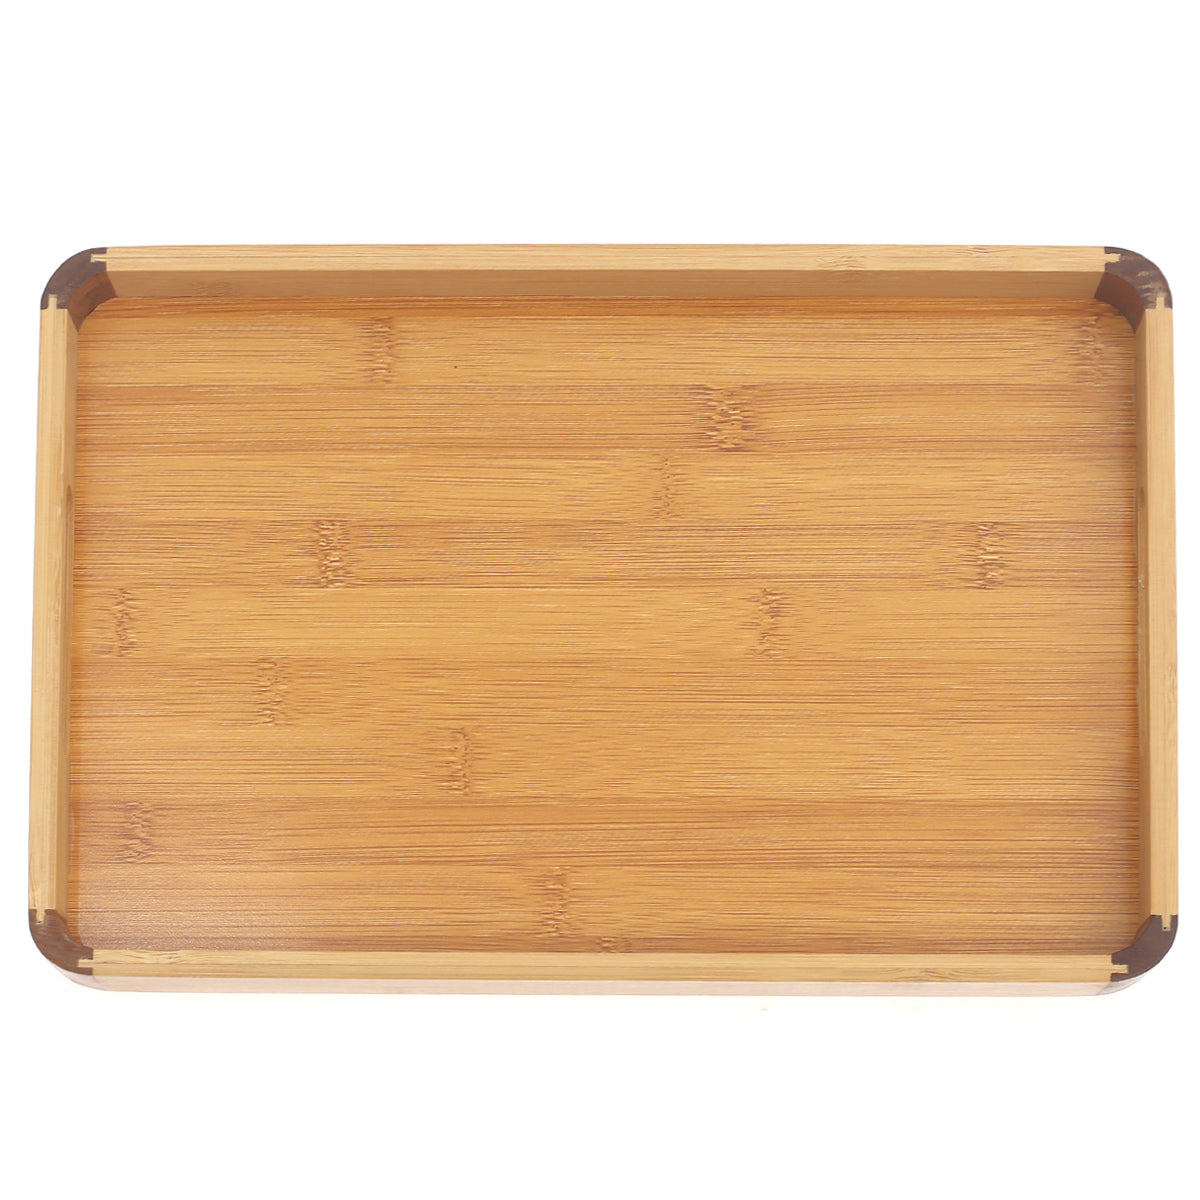 Wooden Tray Large D-3